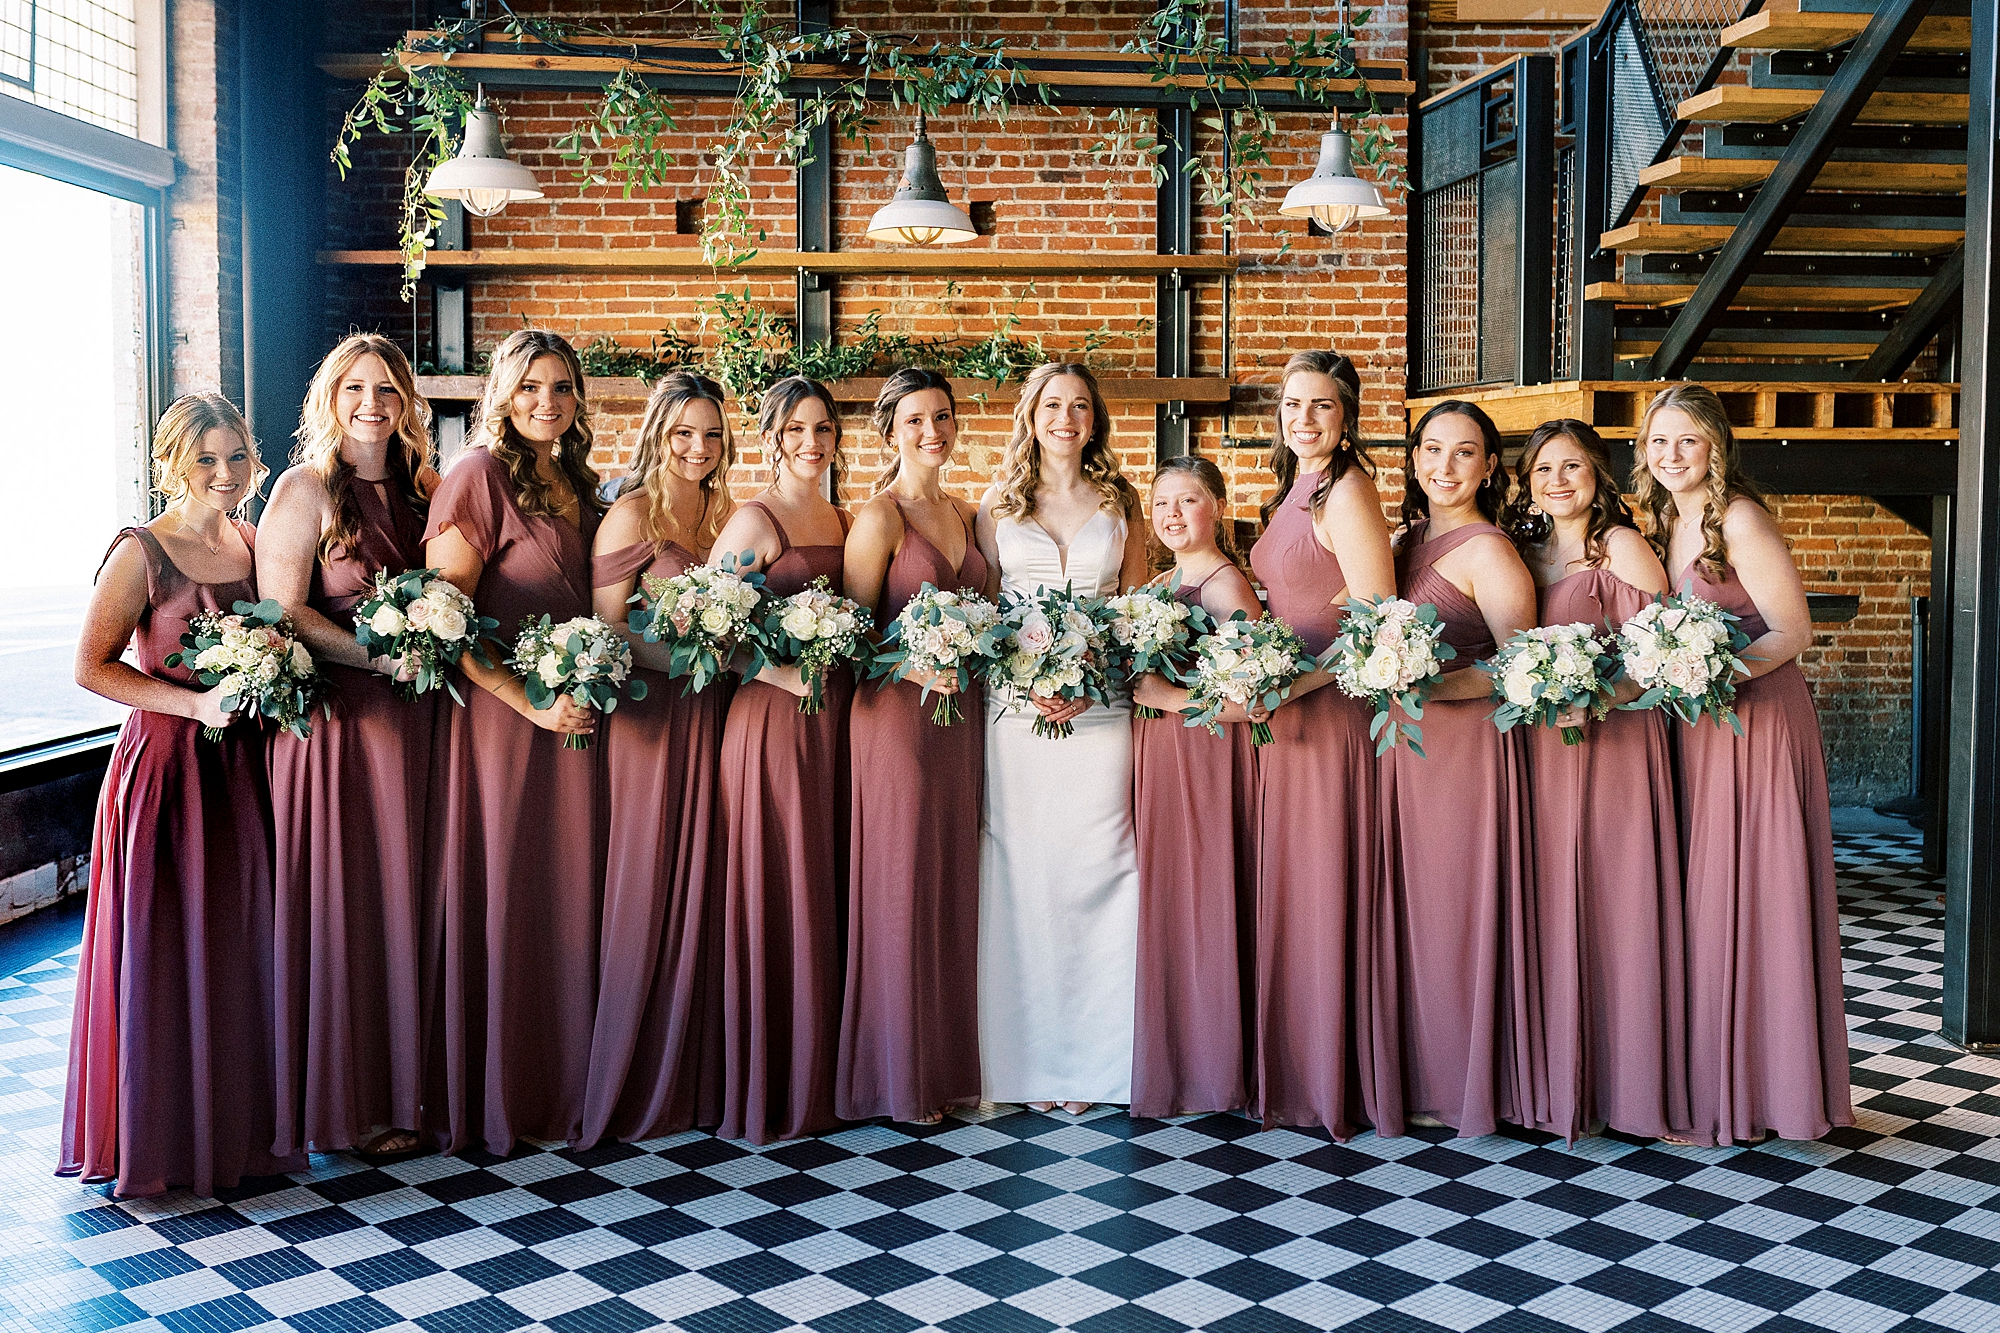 bride poses with bridesmaids in rose gowns on black and white floor